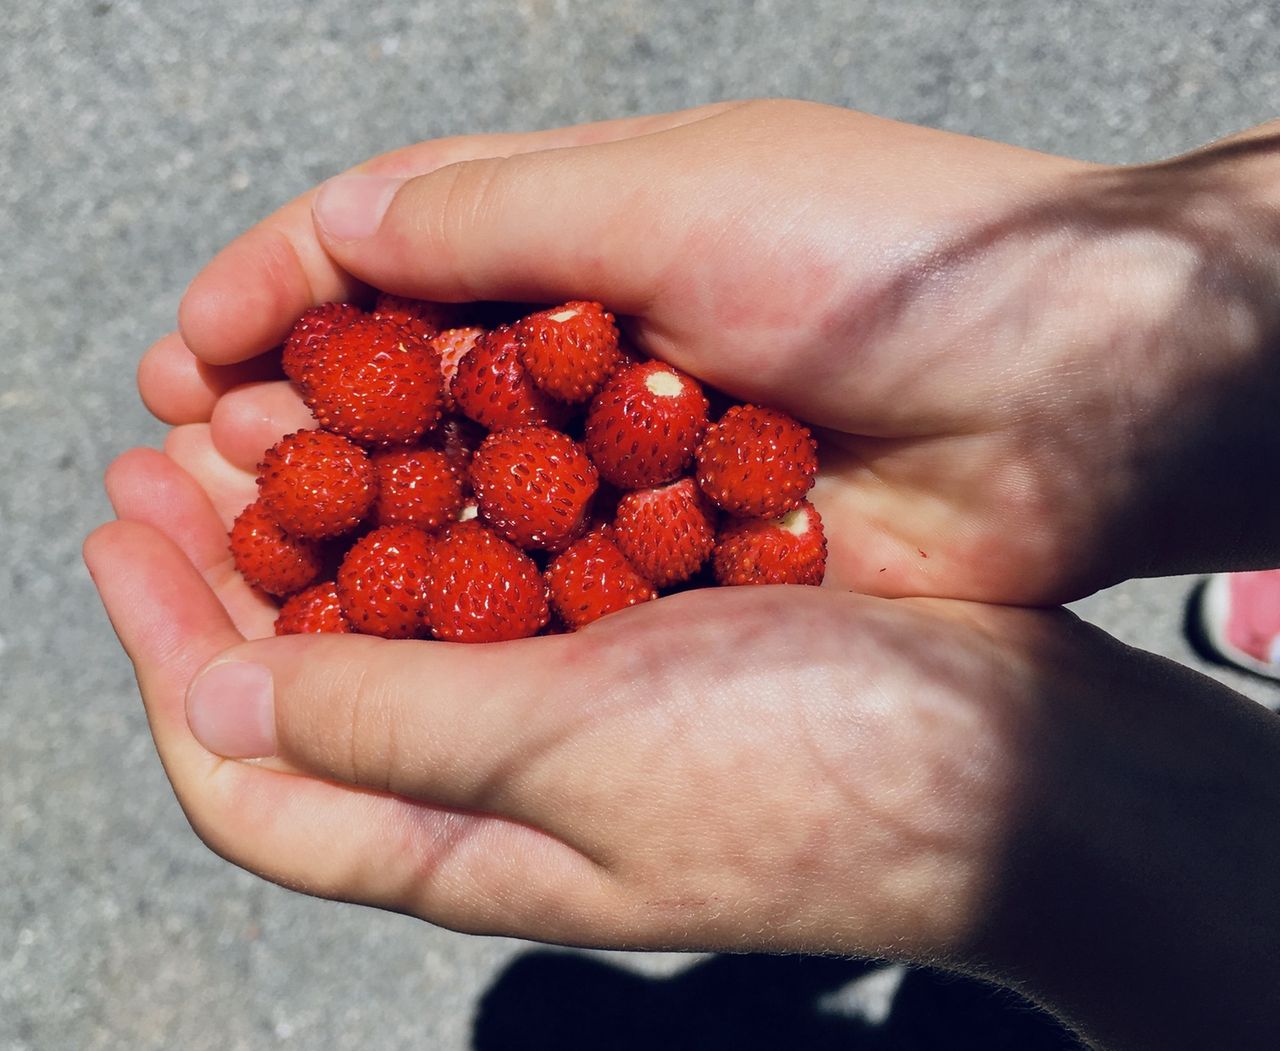 Grow wild strawberries at home. Immune-boosting superfruits you can harvest on your balcony